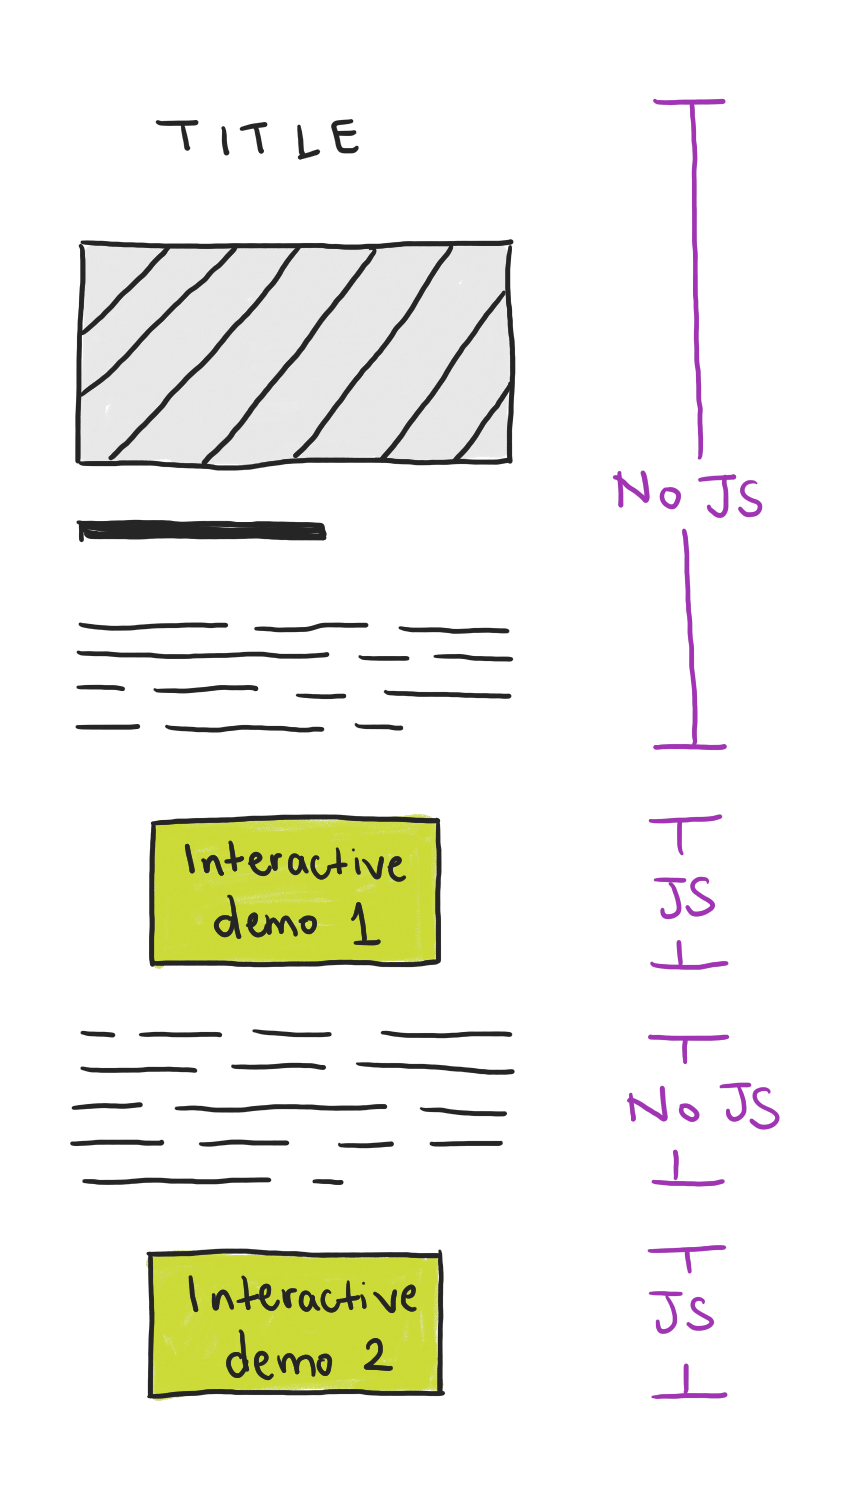 A drawing of a web page, most of which does not use Javascript. There are two interactive demos that do use Javascript.